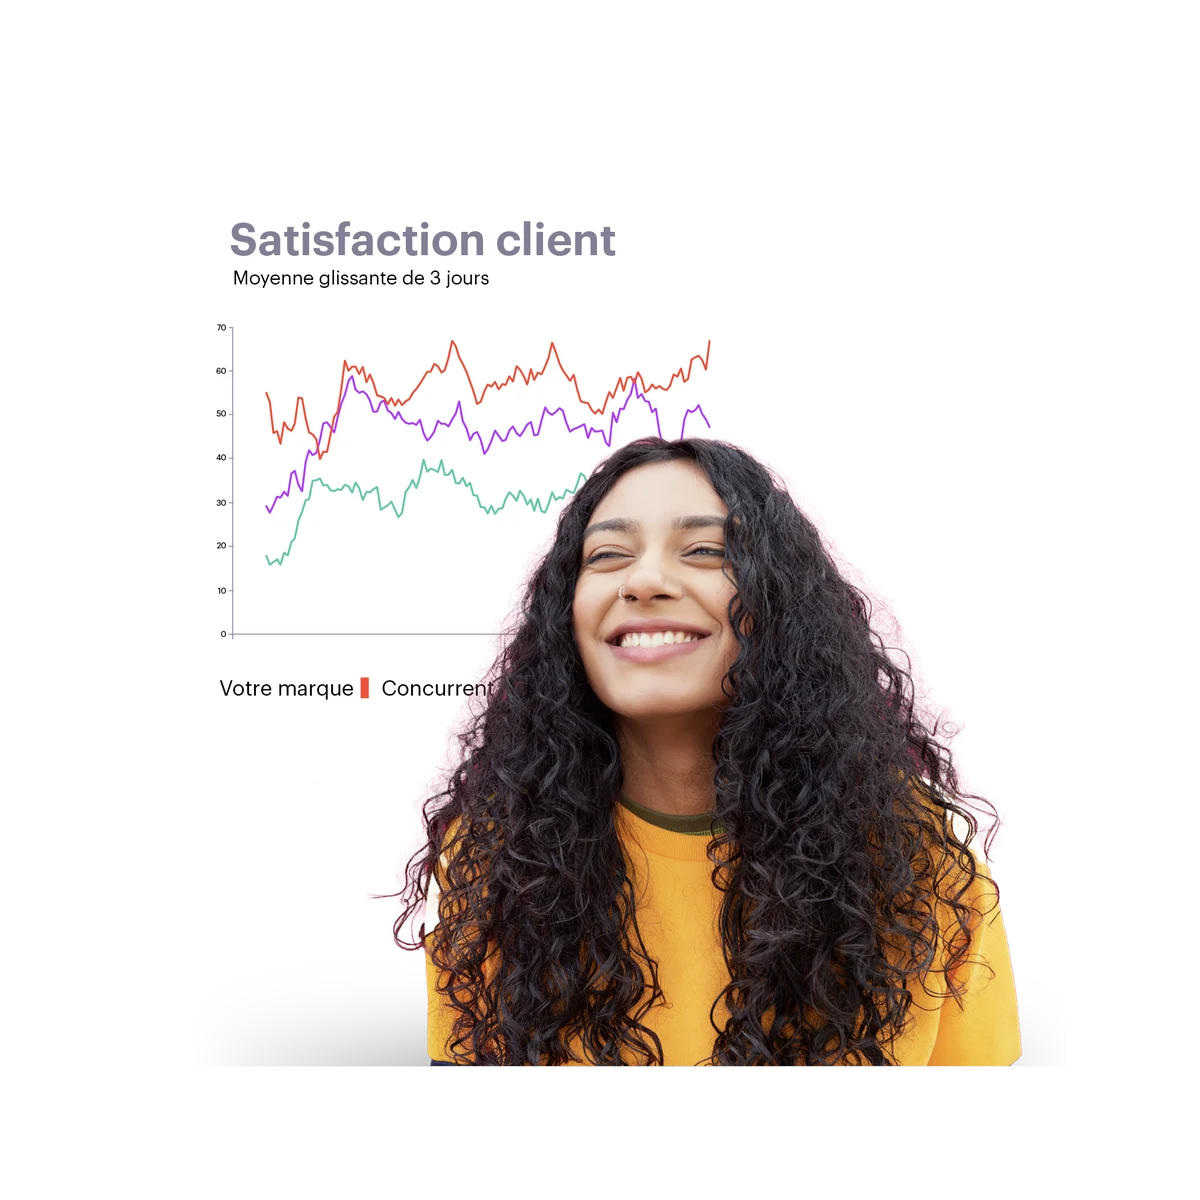 girl with long curly hair and customer satisfaction data in the background